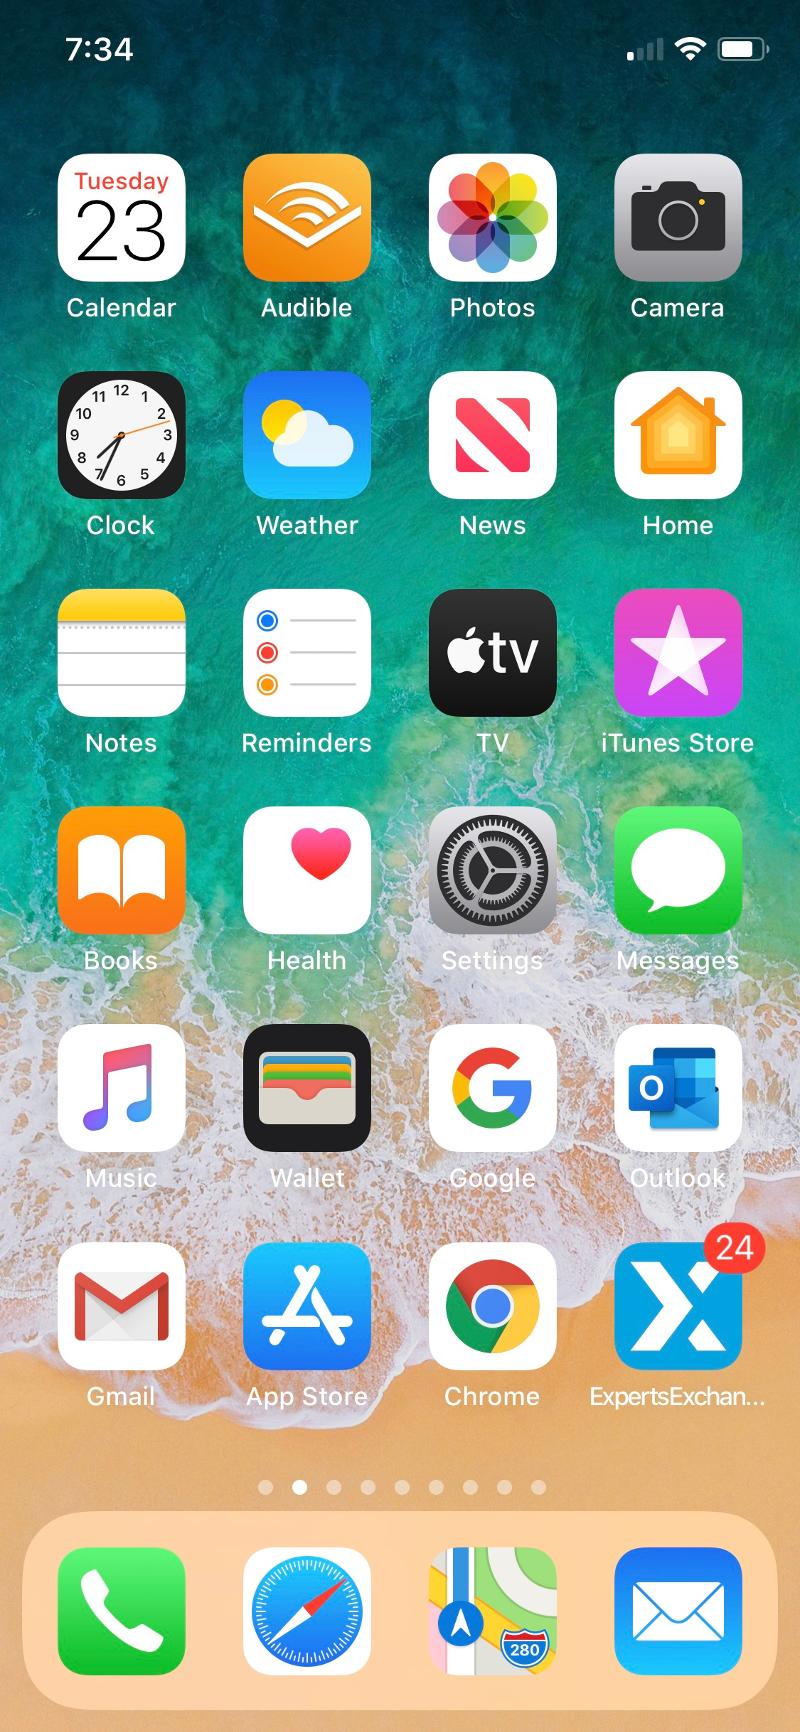 Gmail App Icon On Iphone Home Screen No L Apple Community